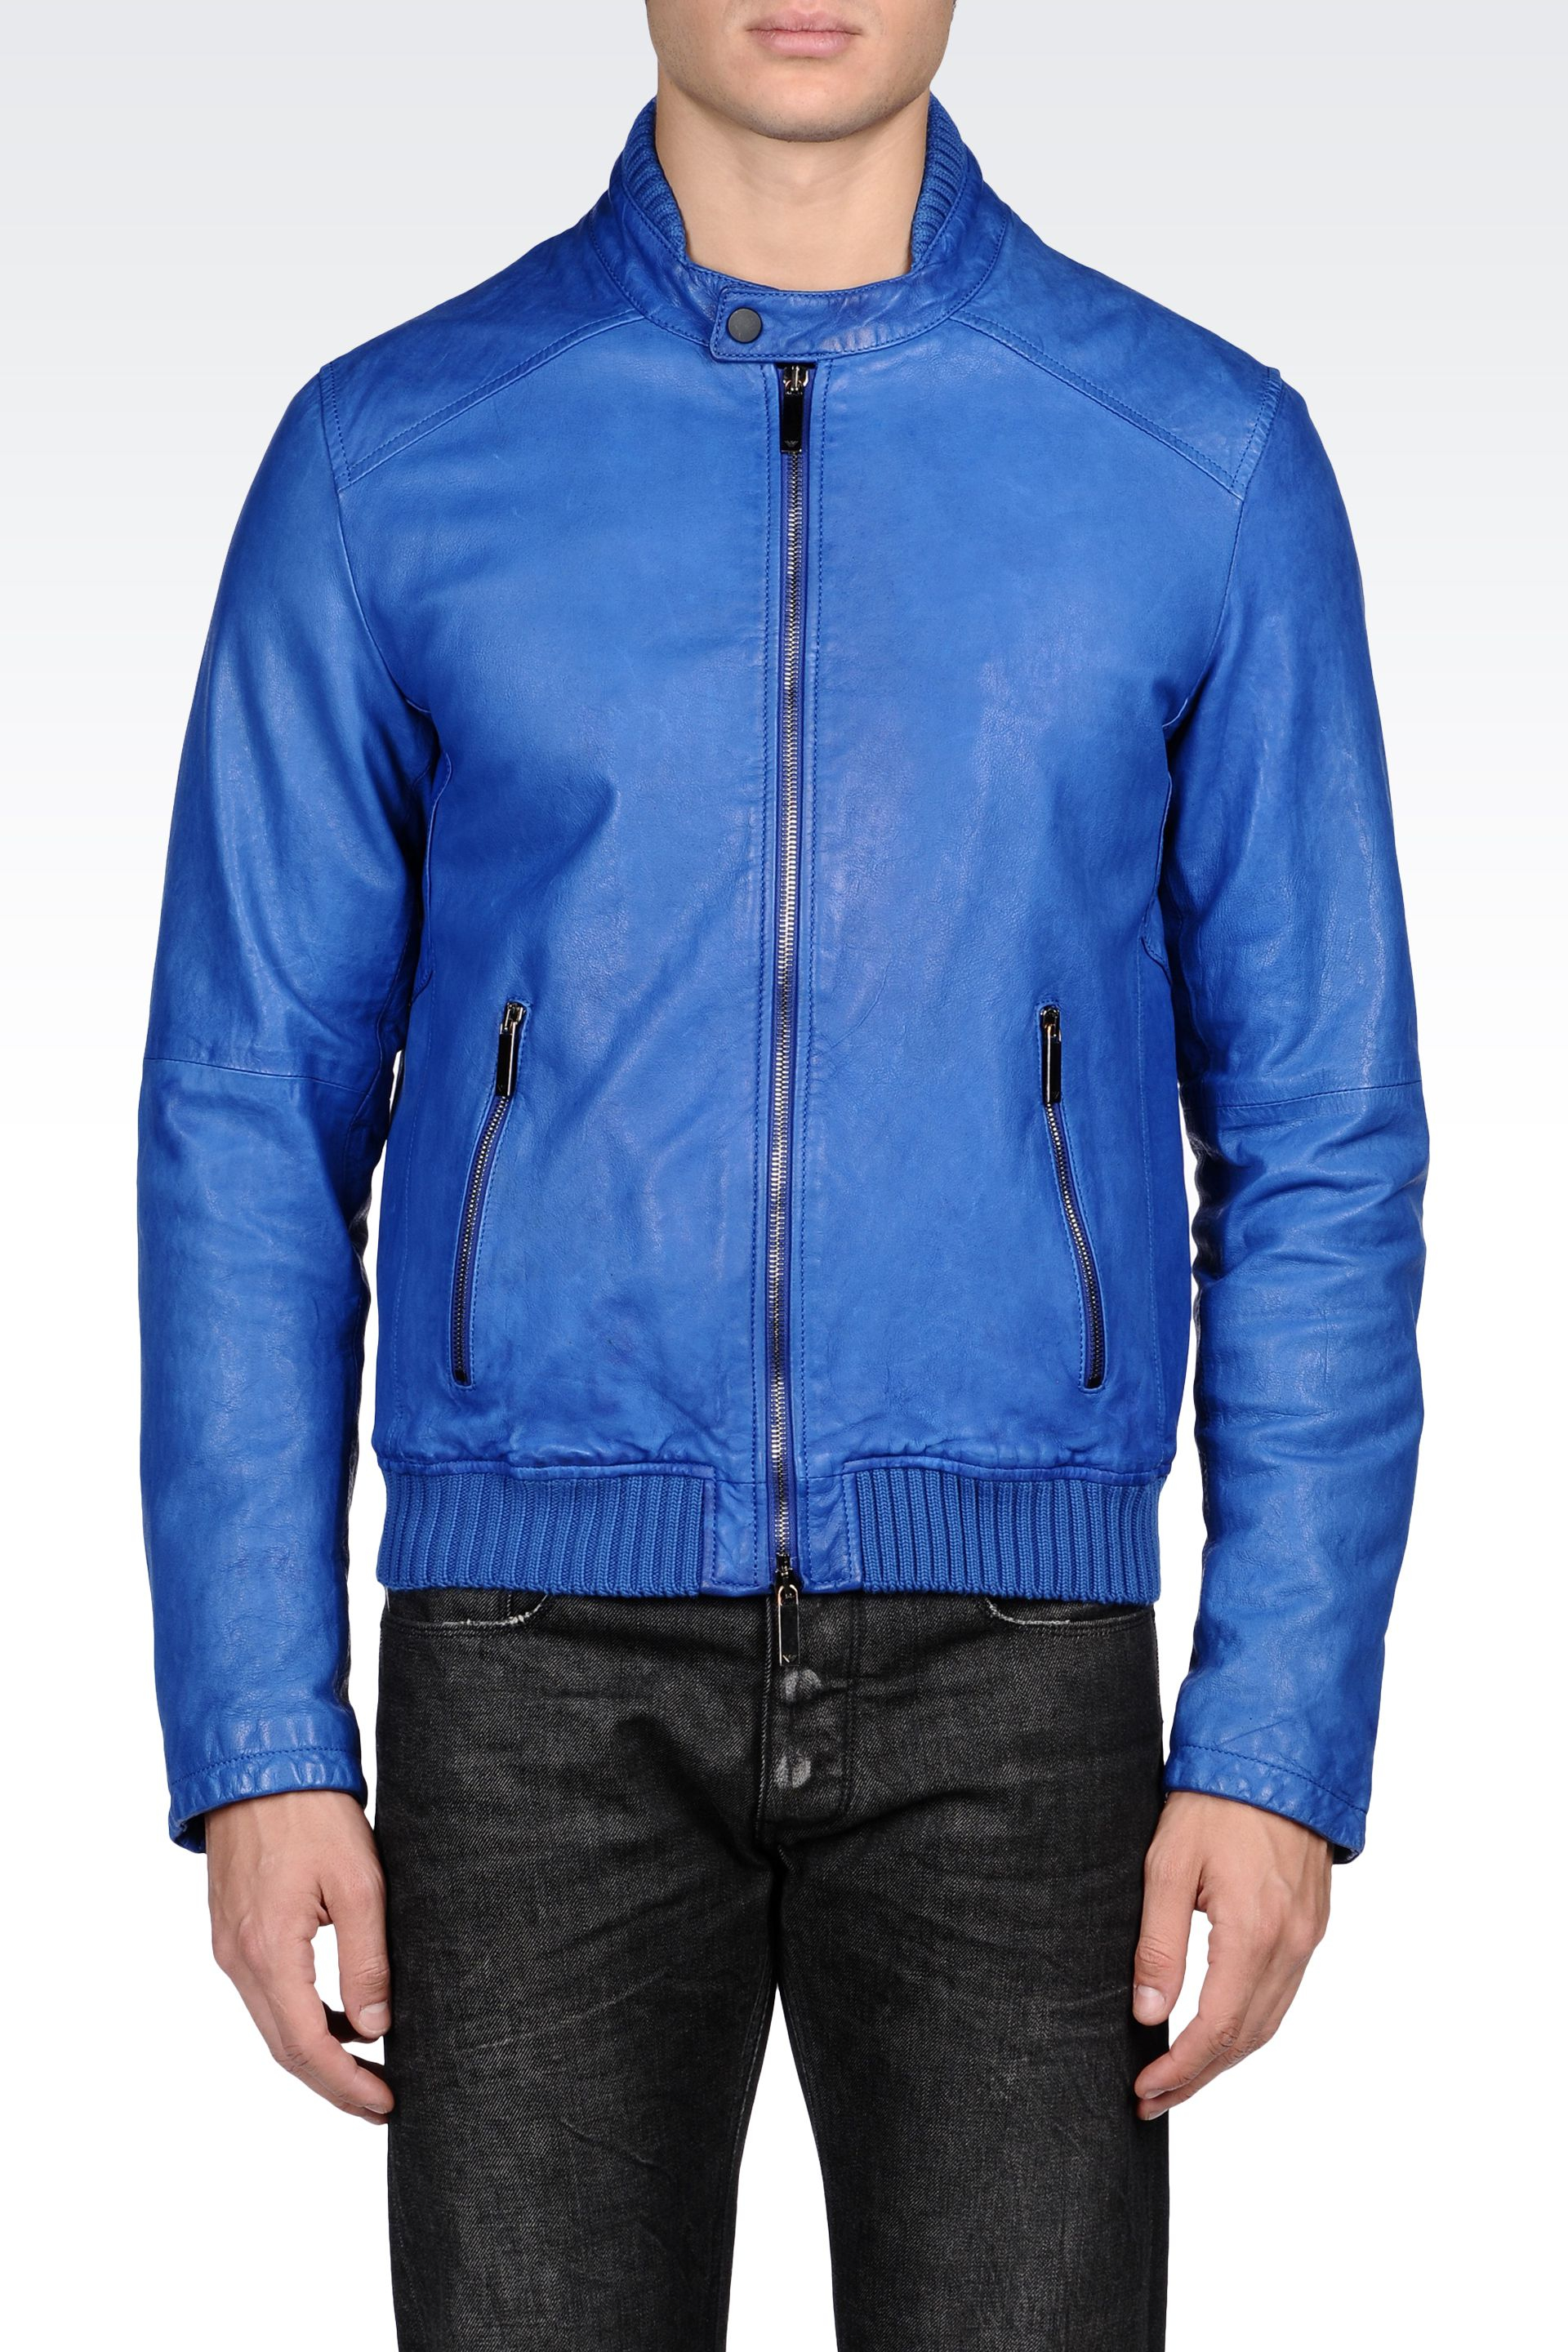 Emporio armani Nappa Leather Biker Jacket with Knit Details in Blue for ...